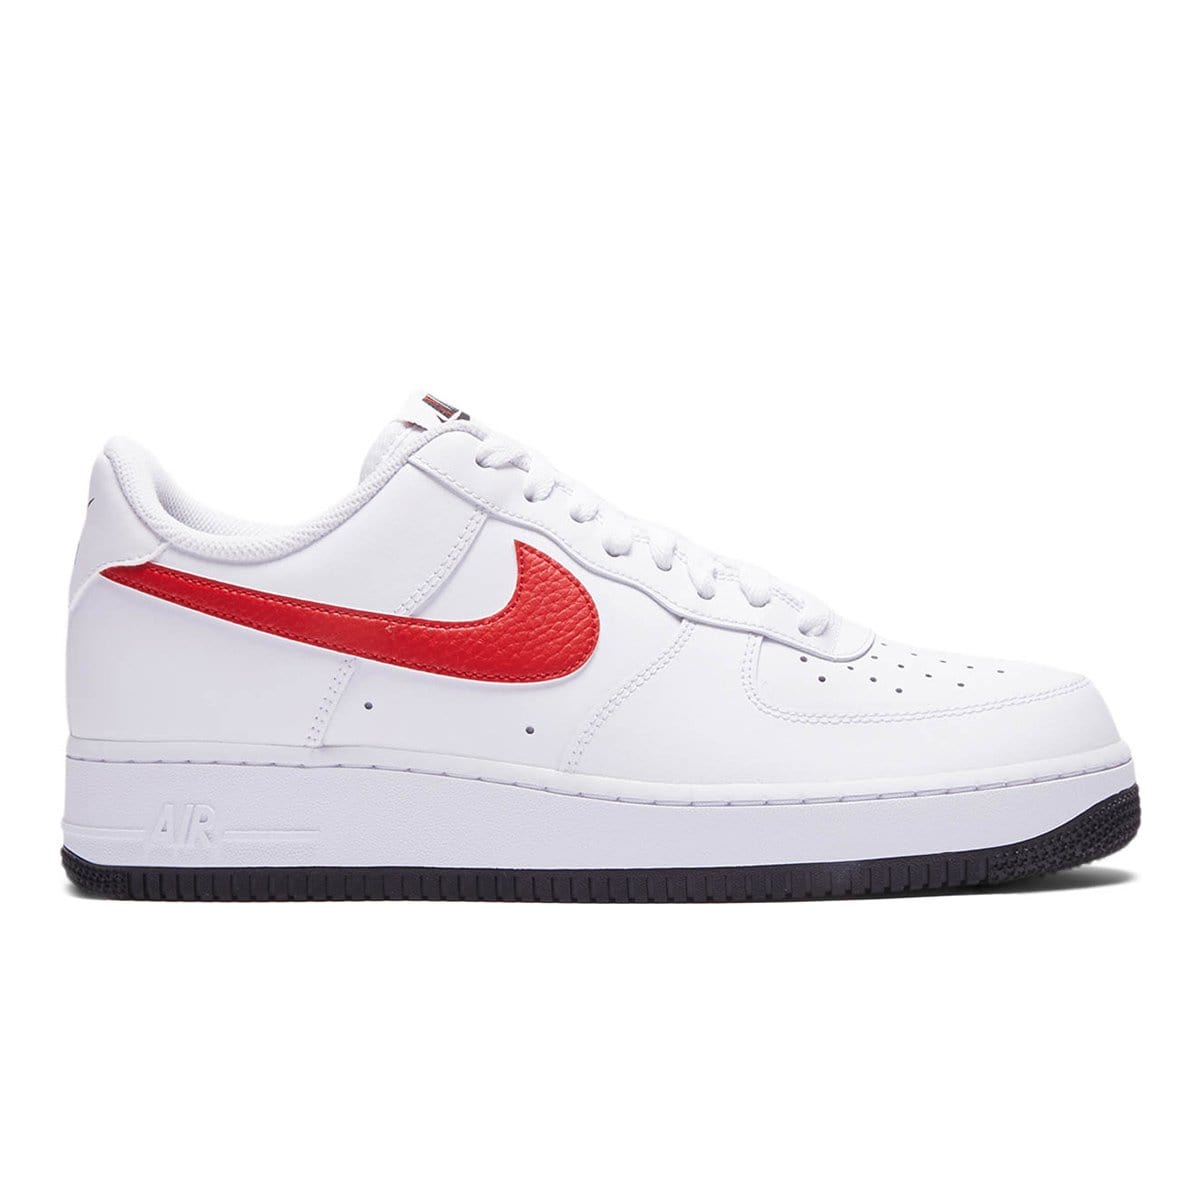 air force one red and blue swoosh